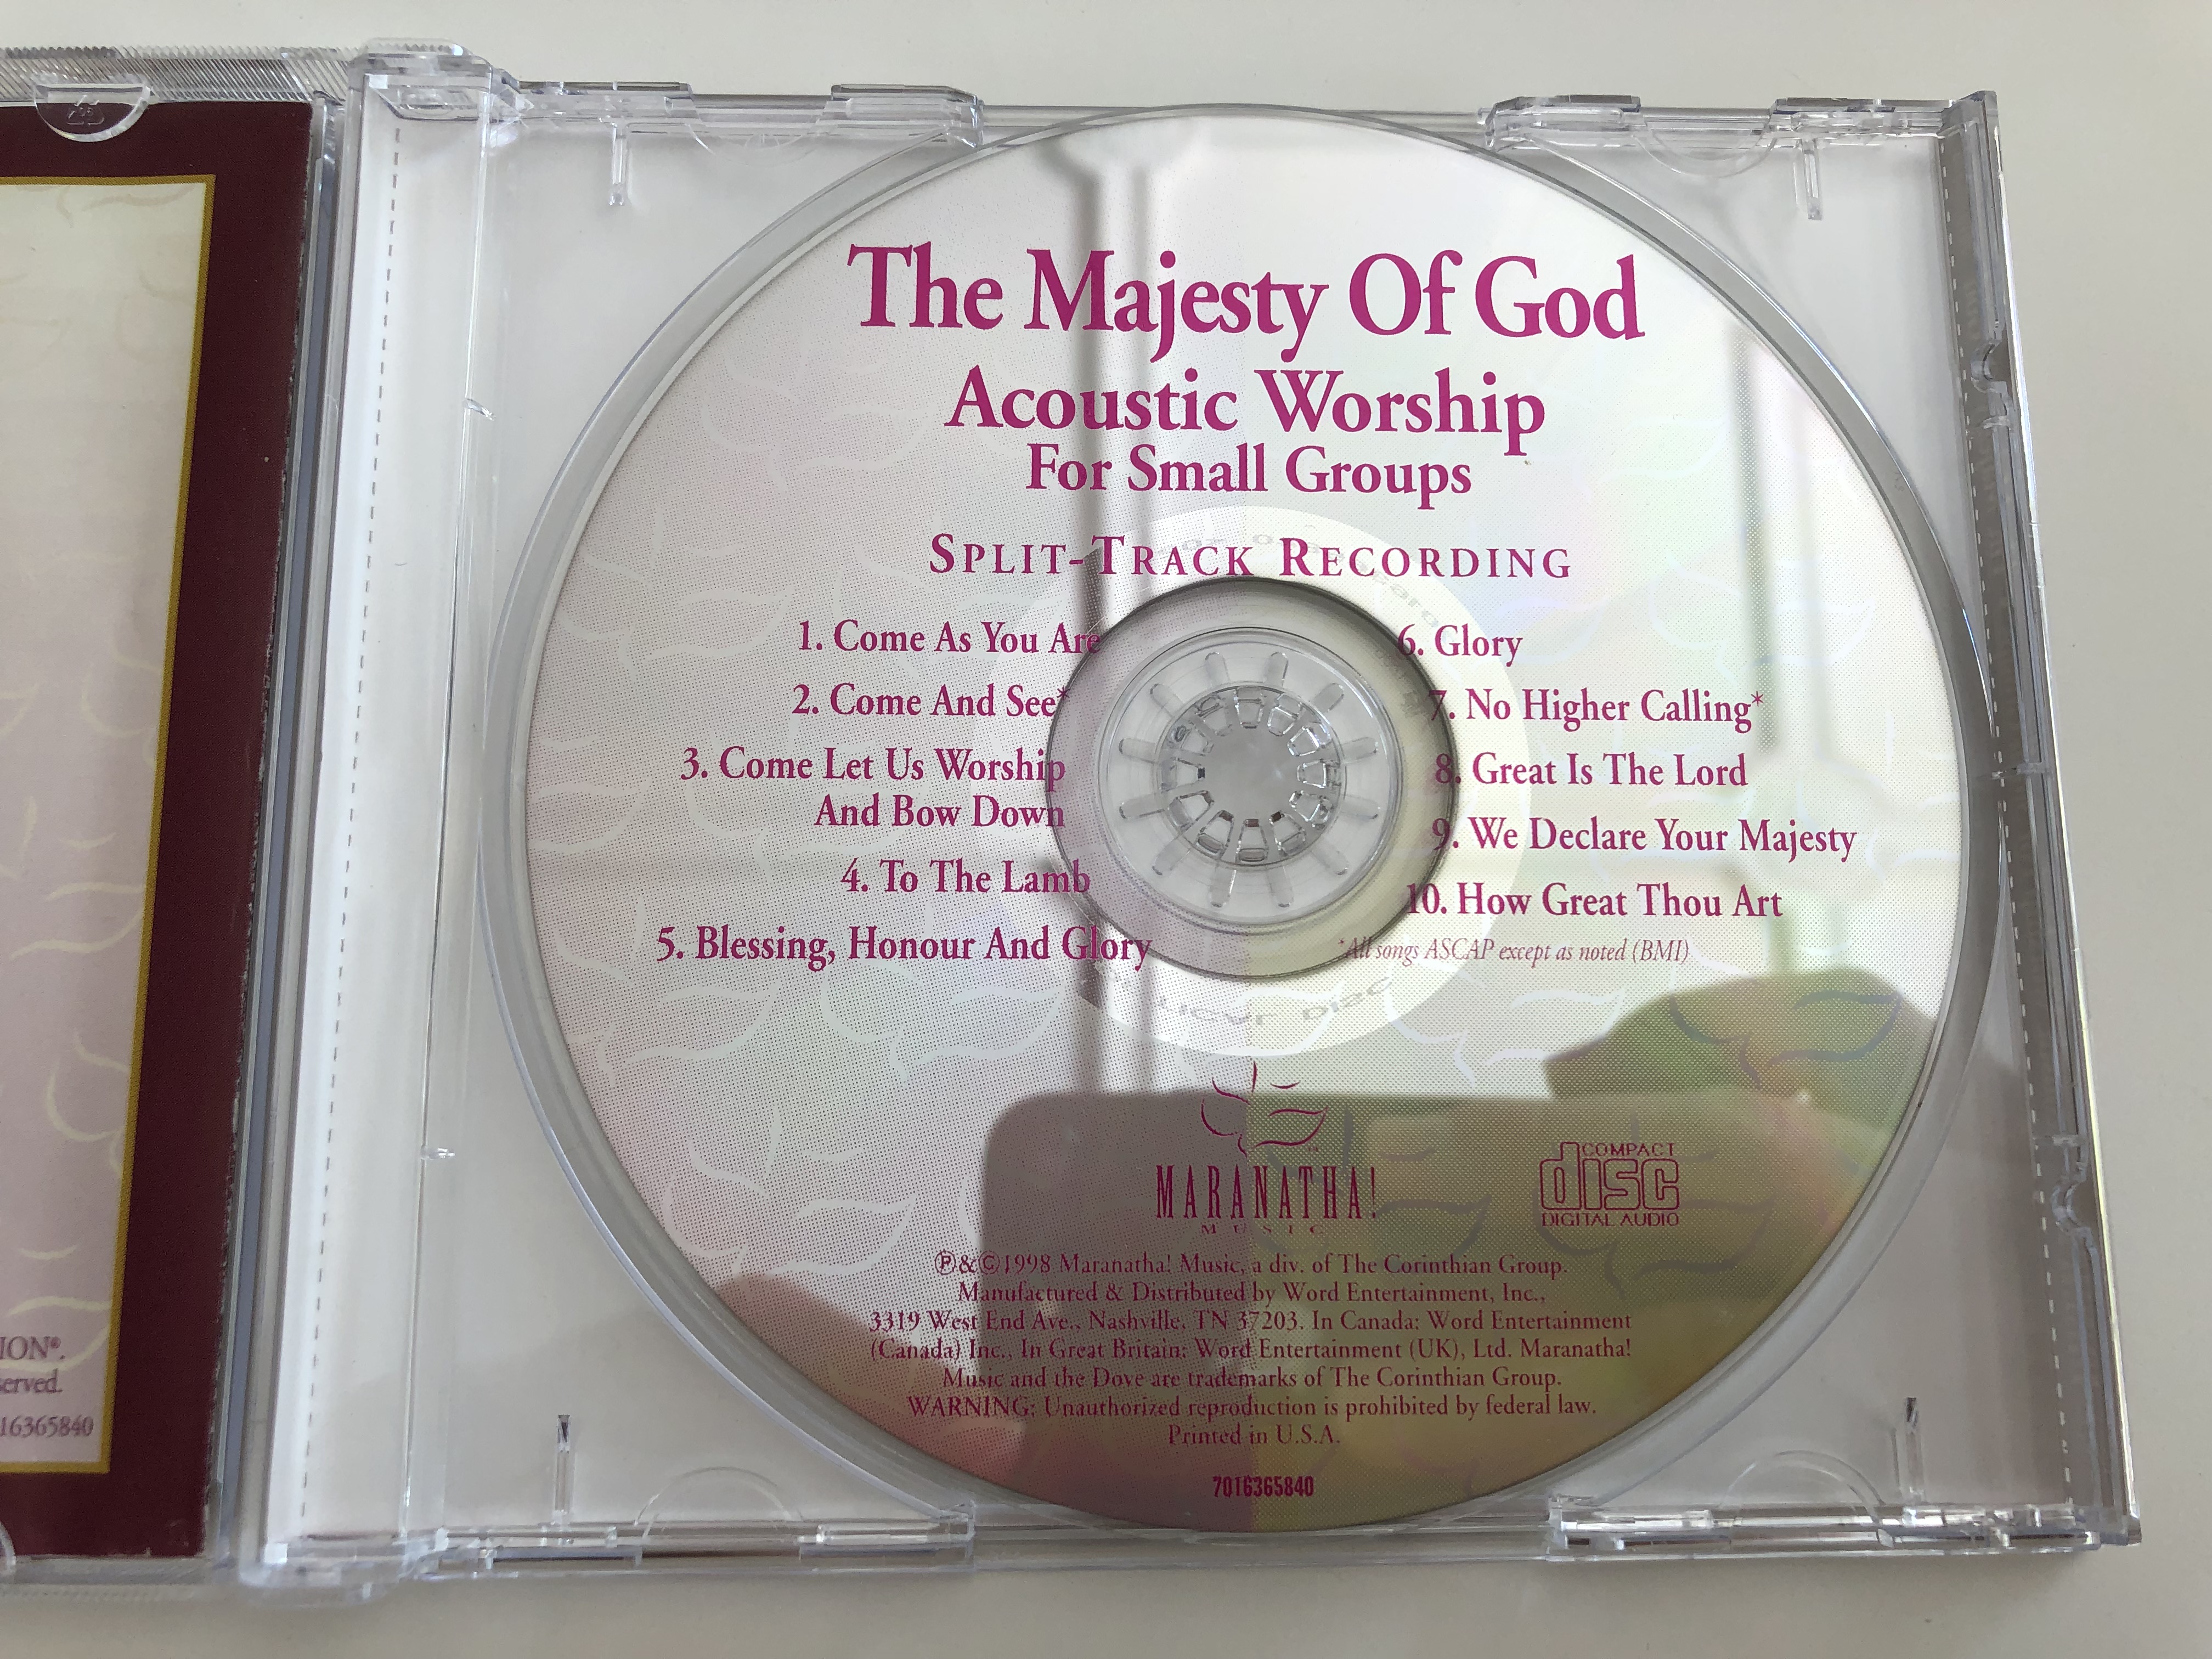 the-majesty-of-god-praise-hymns-and-choruses-acoustic-worship-for-small-groups-maranatha-music-new-split-track-recordings-from-the-green-book-expanded-4th-edition-audio-cd-1998-6-.jpg